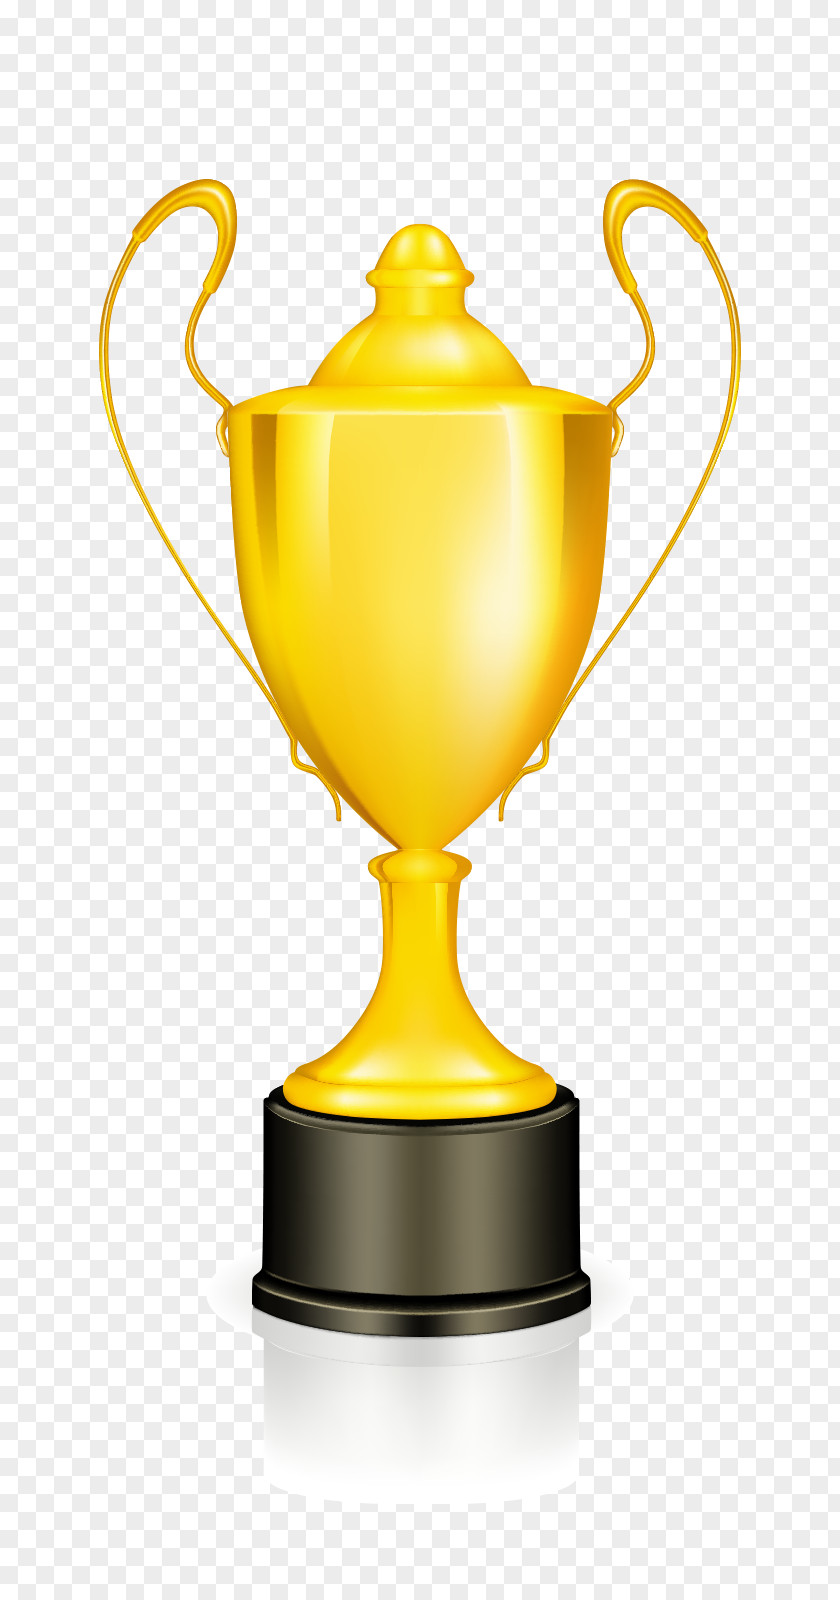 Gold Prize Material Trophy Clip Art PNG